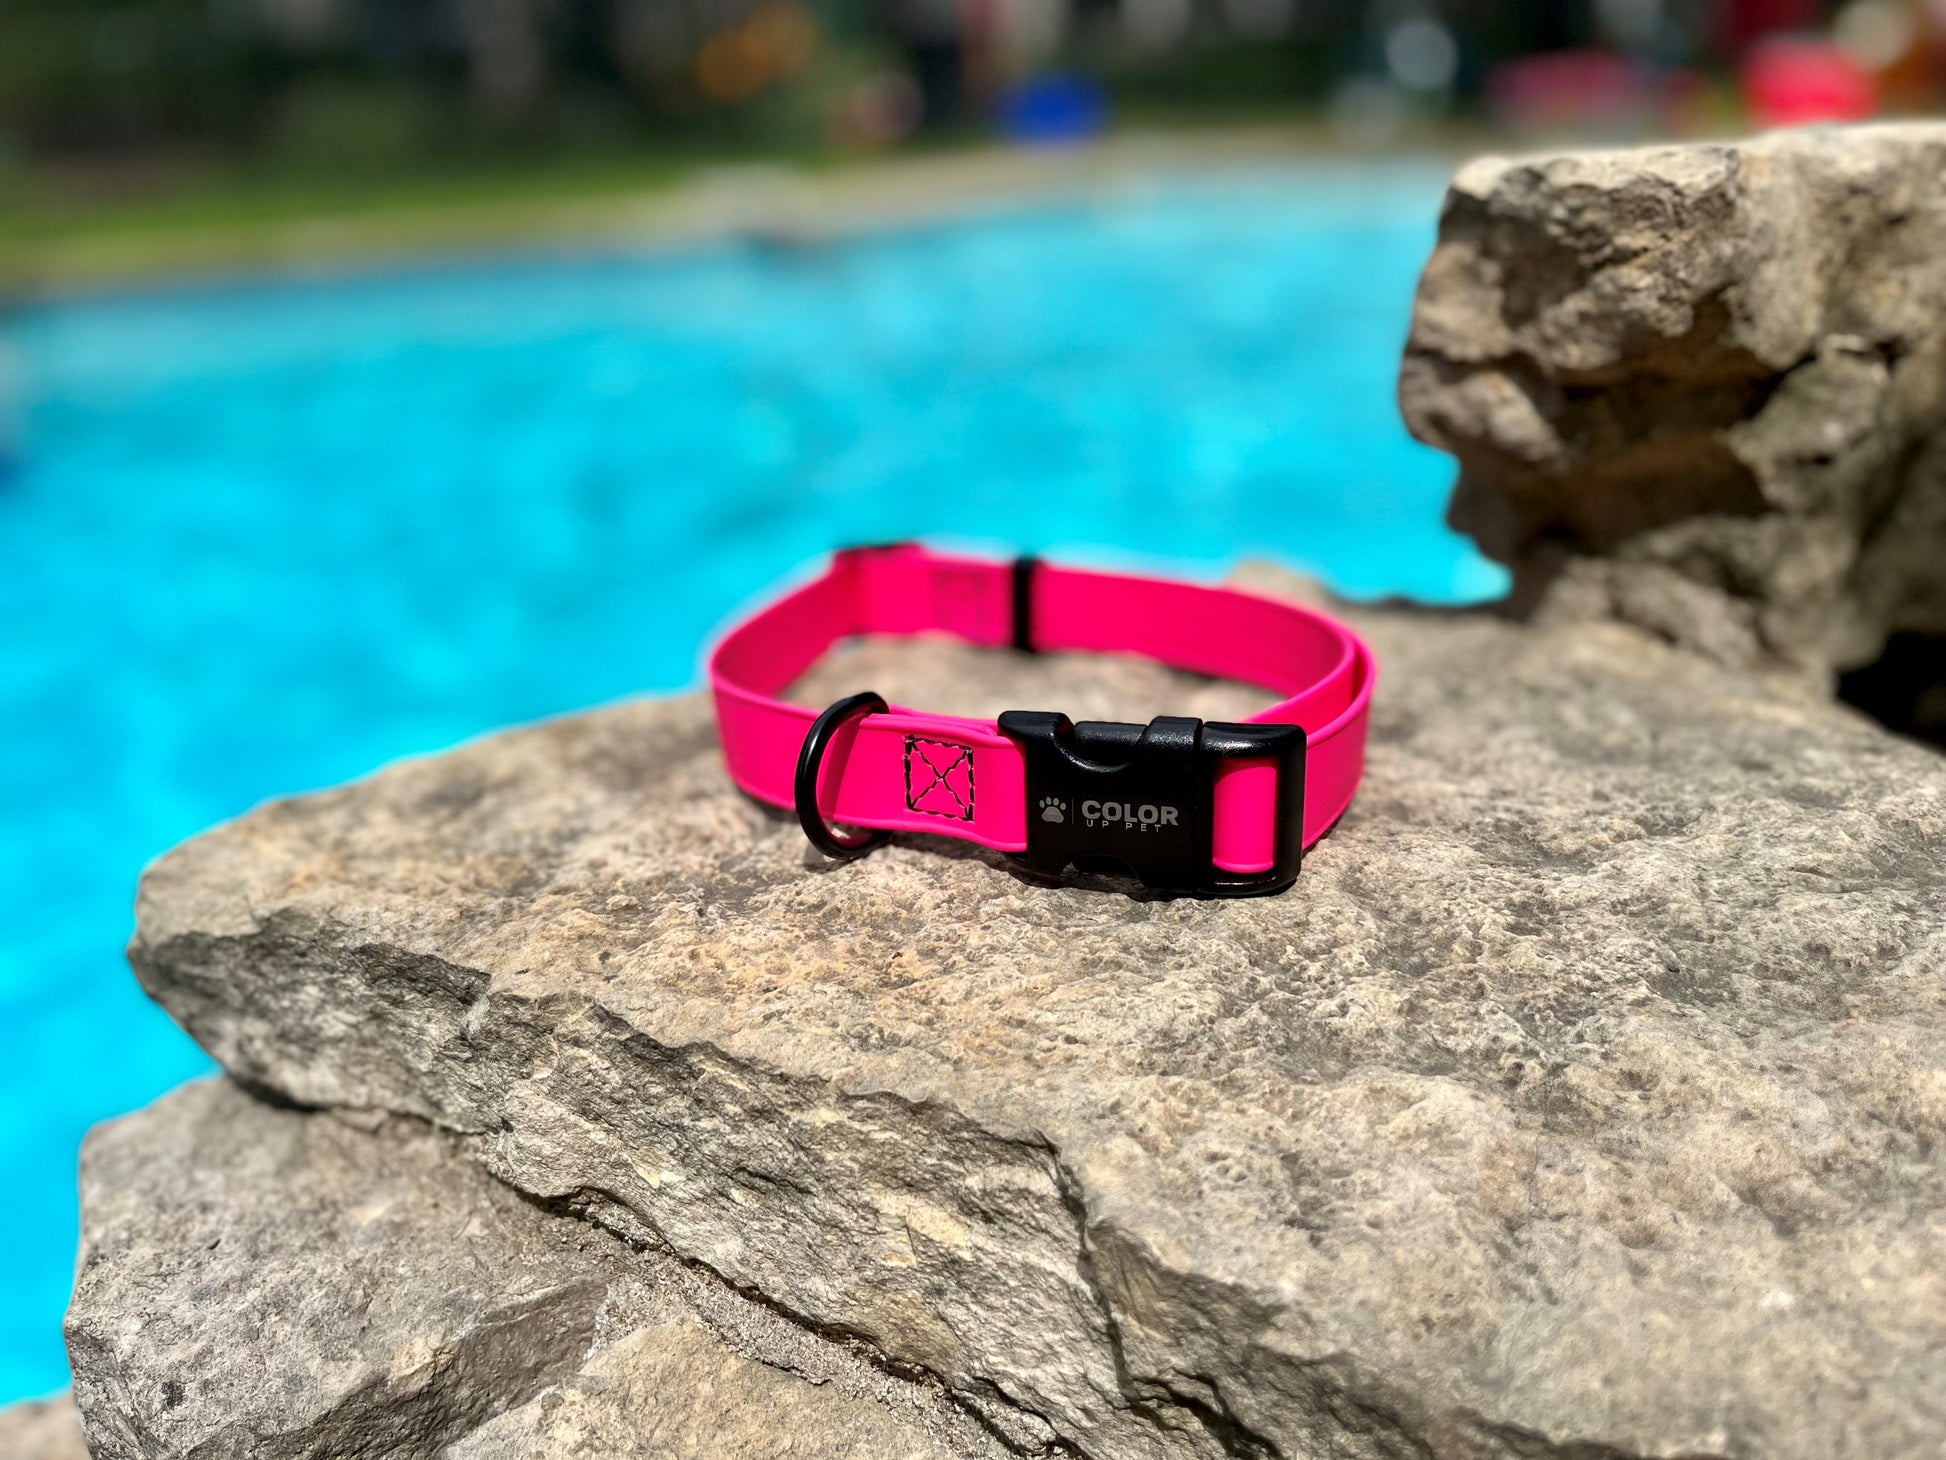 3/4" Width Adjustable Biothane Collar in Hot Pink with side release buckle. Waterproof, wont hold odors or moisture against dogs coat. Easy to clean and extremely durable. 